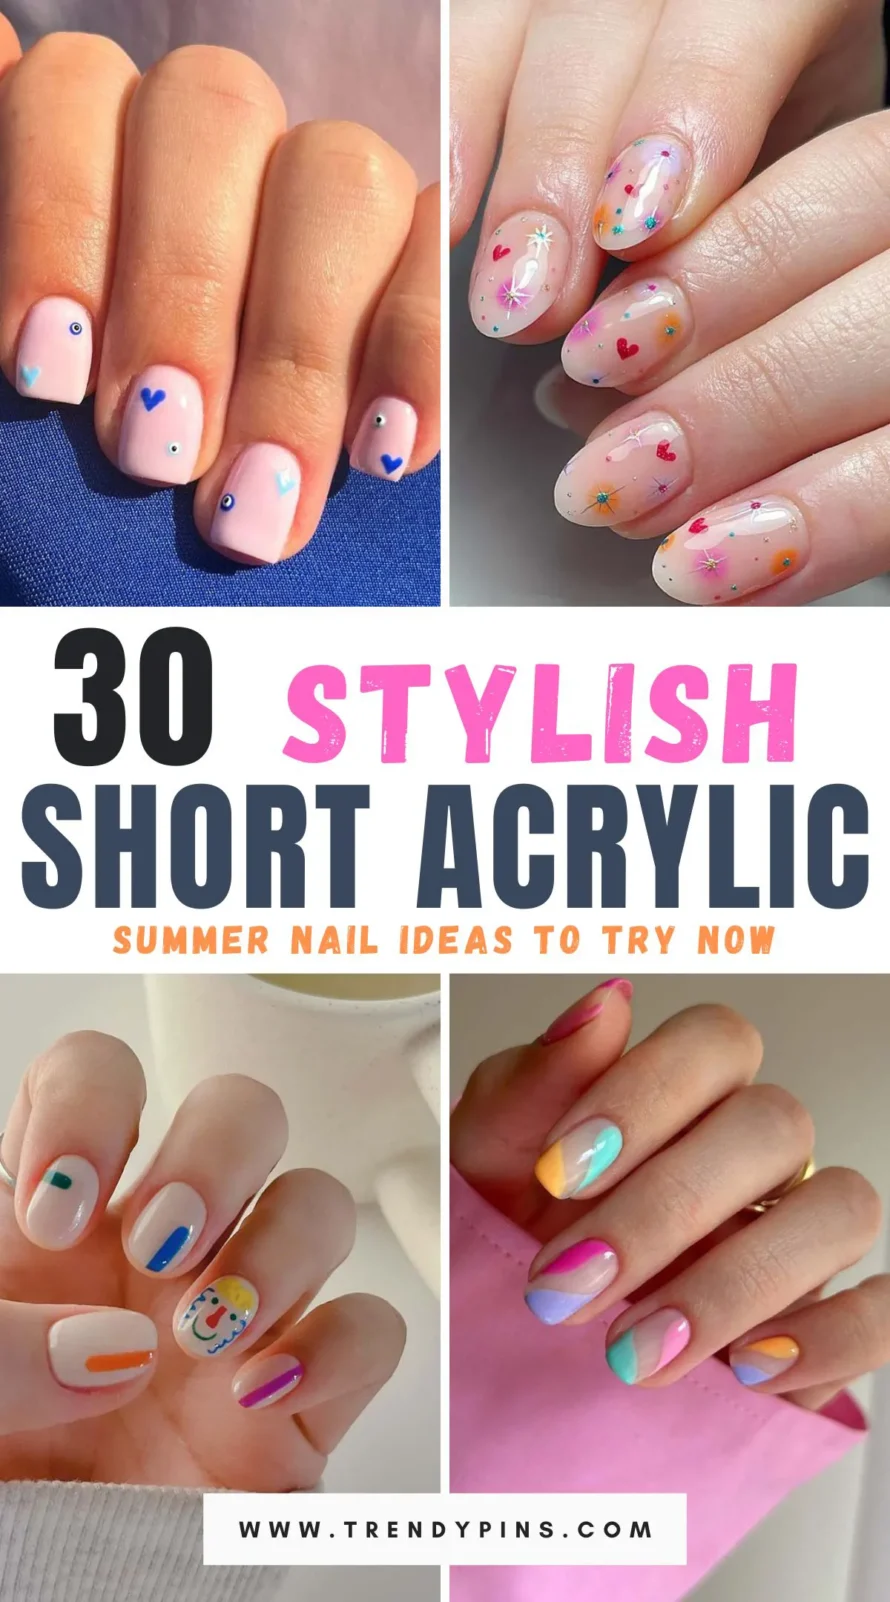 Step up your summer style with these 30 chic short acrylic nail ideas. From vibrant tropical designs to elegant pastel shades, discover trendy options that perfectly complement the season. Explore a range of creative patterns, bold colors, and unique accents to keep your nails looking fresh, stylish, and ready for any summer adventure.